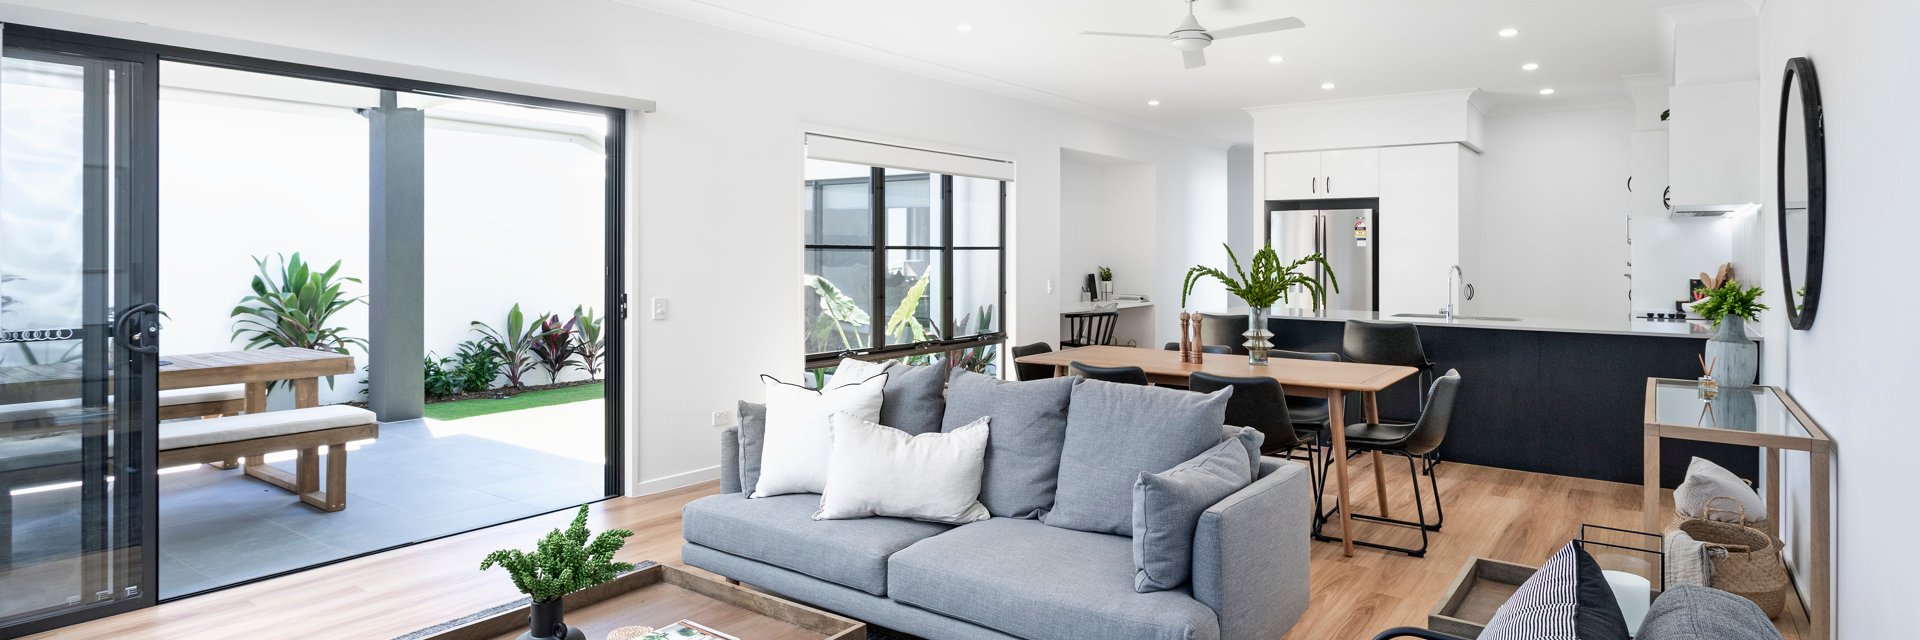 Beautiful modern interior living room display at a Stockland Halcyon community